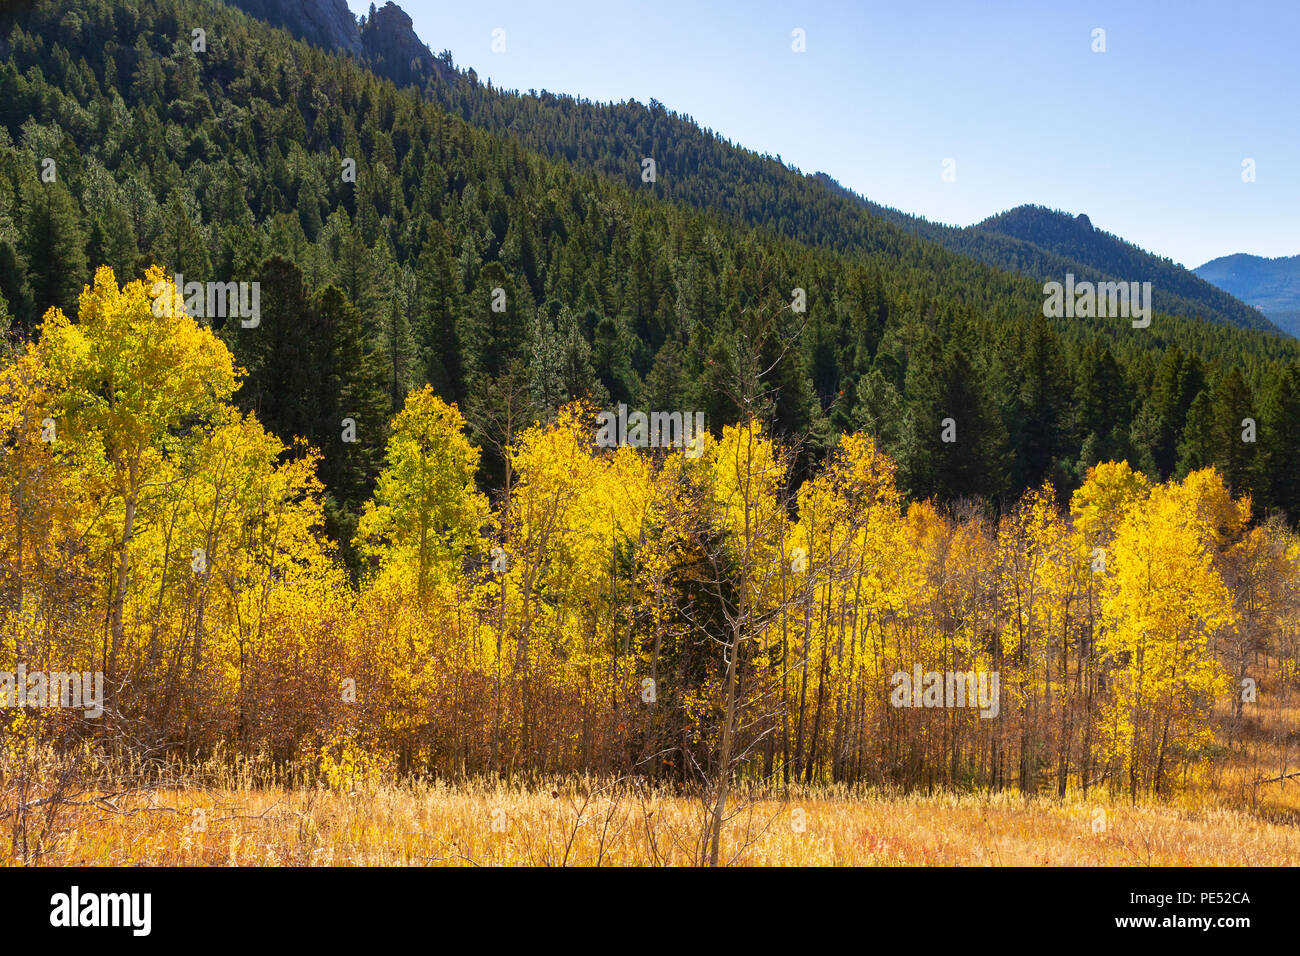 Aspens changing to yellow in the fall in the Rocky Mountains Stock Photo